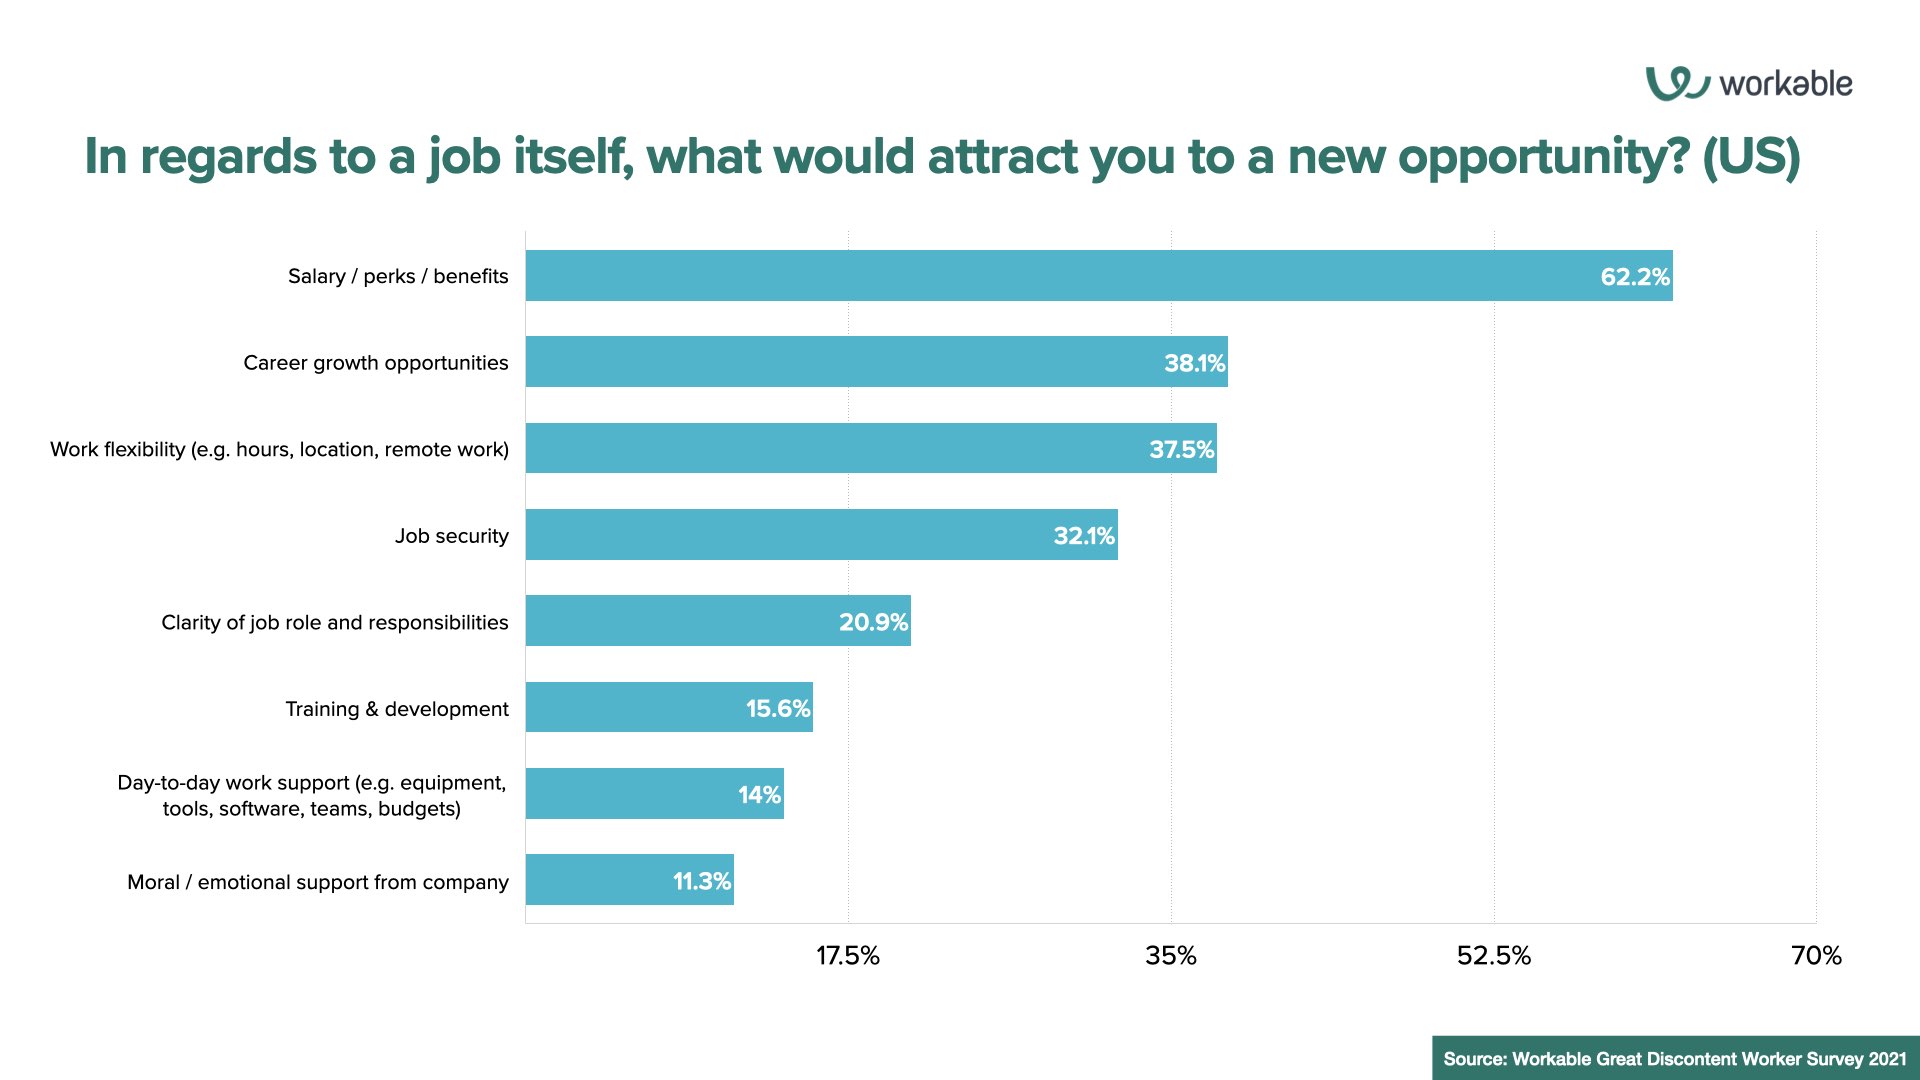 In regards to a job itself, what would attract you to a new opportunity? (US)